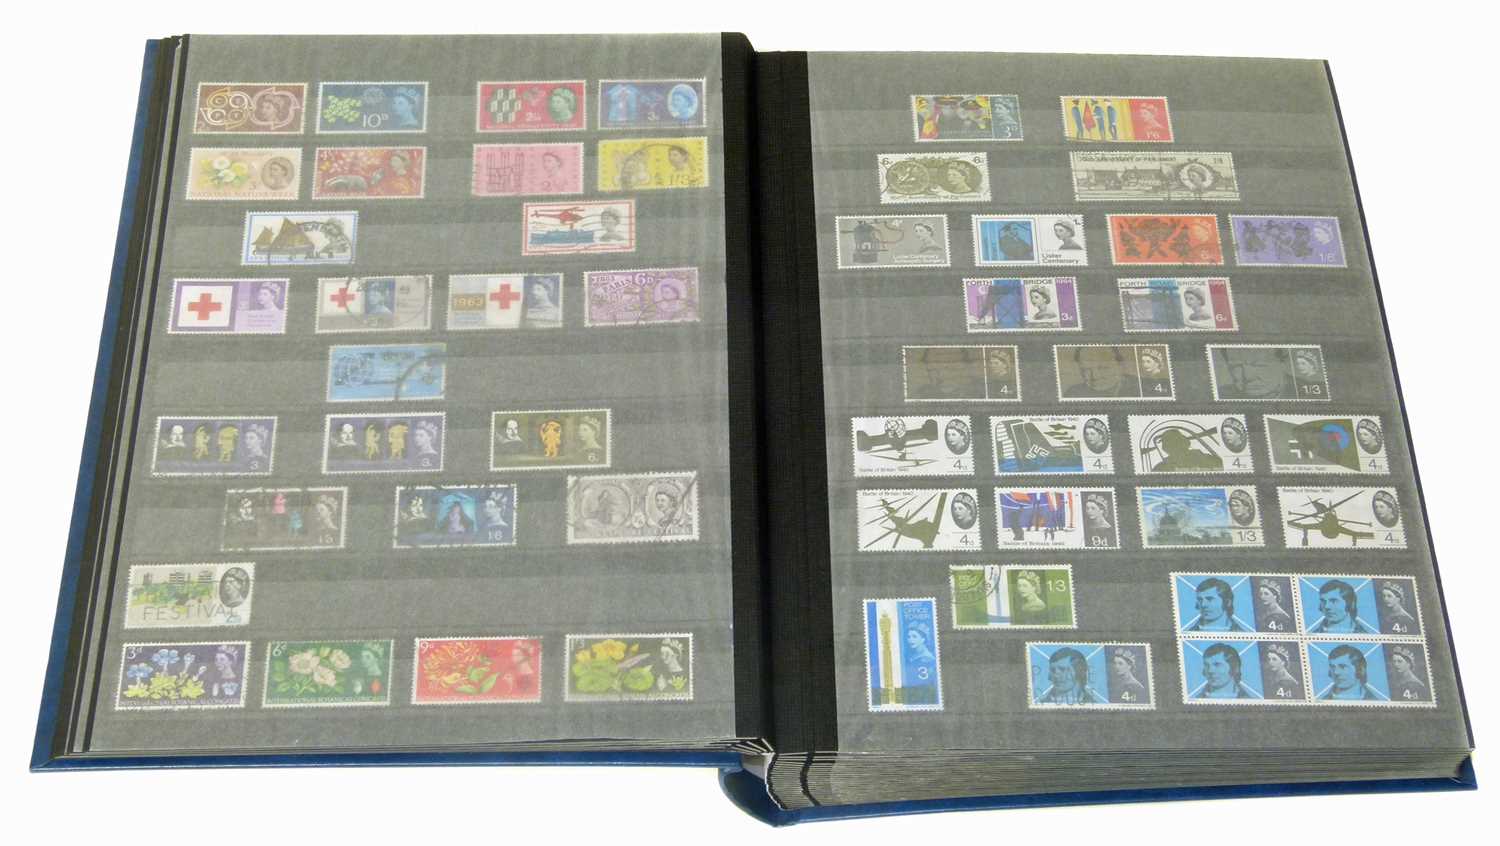 Lot 92 - GB Collection in lindner stockbook from 1840-1992, early issues mainly used, some later decimal mint sets.